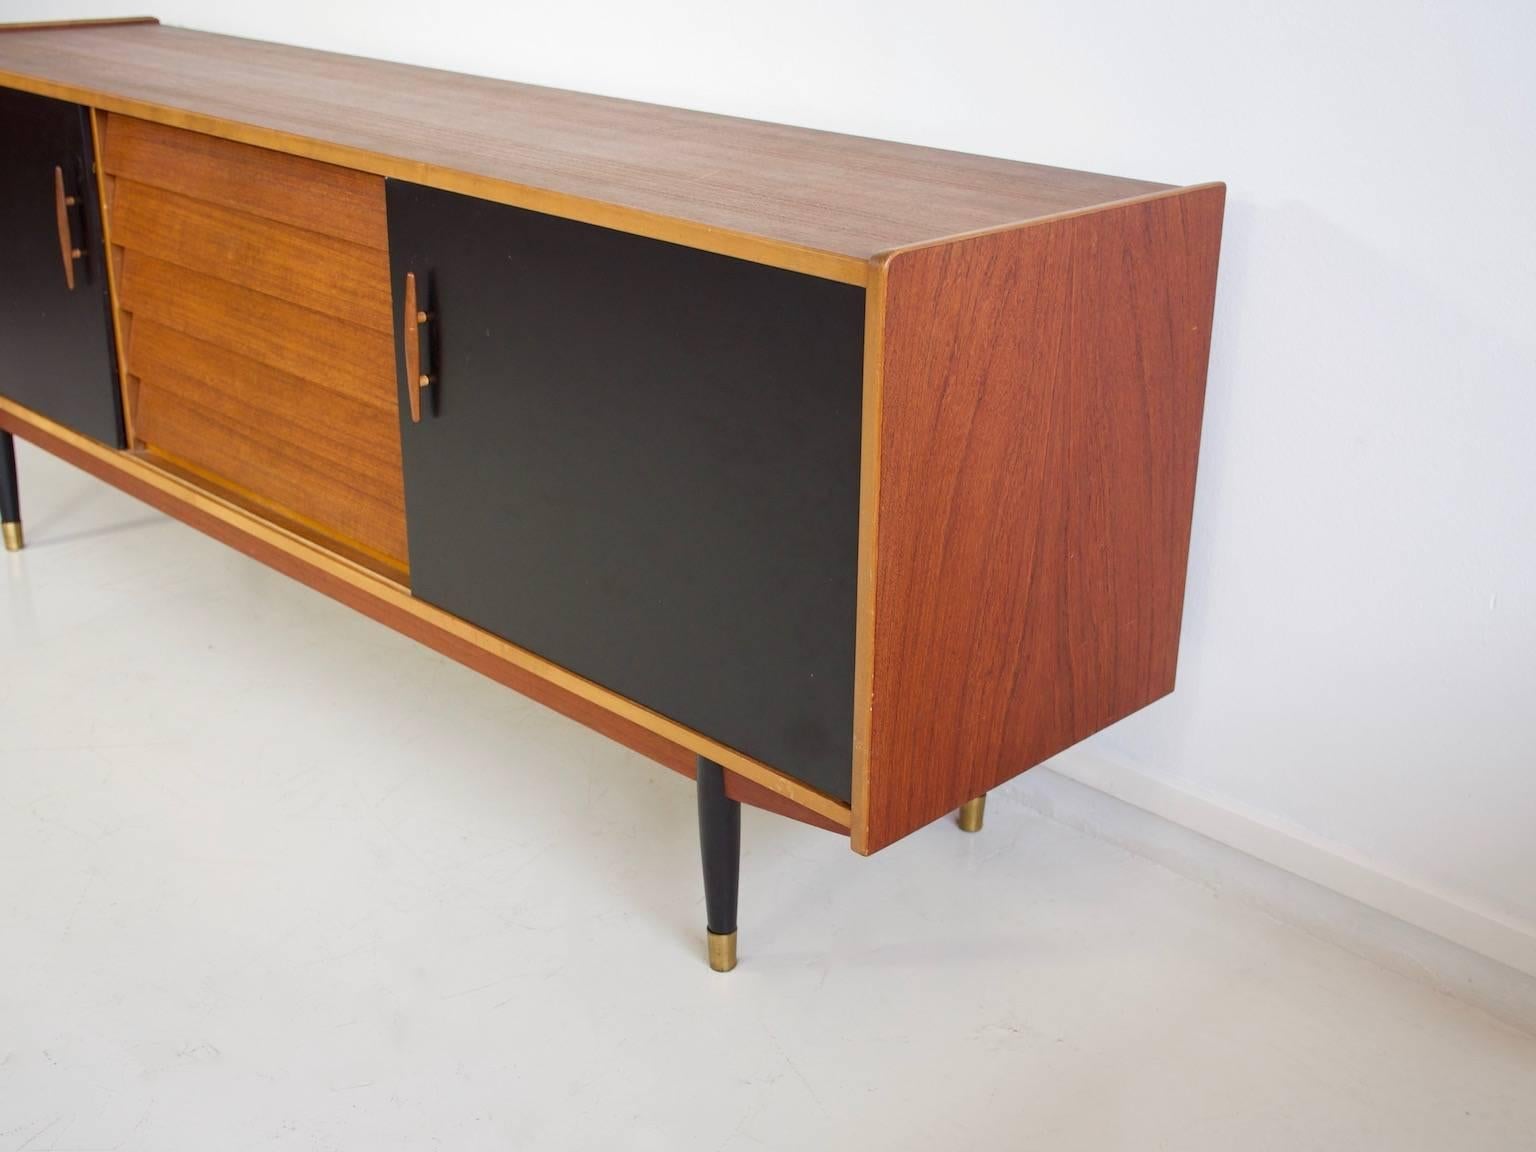 20th Century Long Teak Sideboard with Drawers and Black Sliding Doors by Hugo Troeds